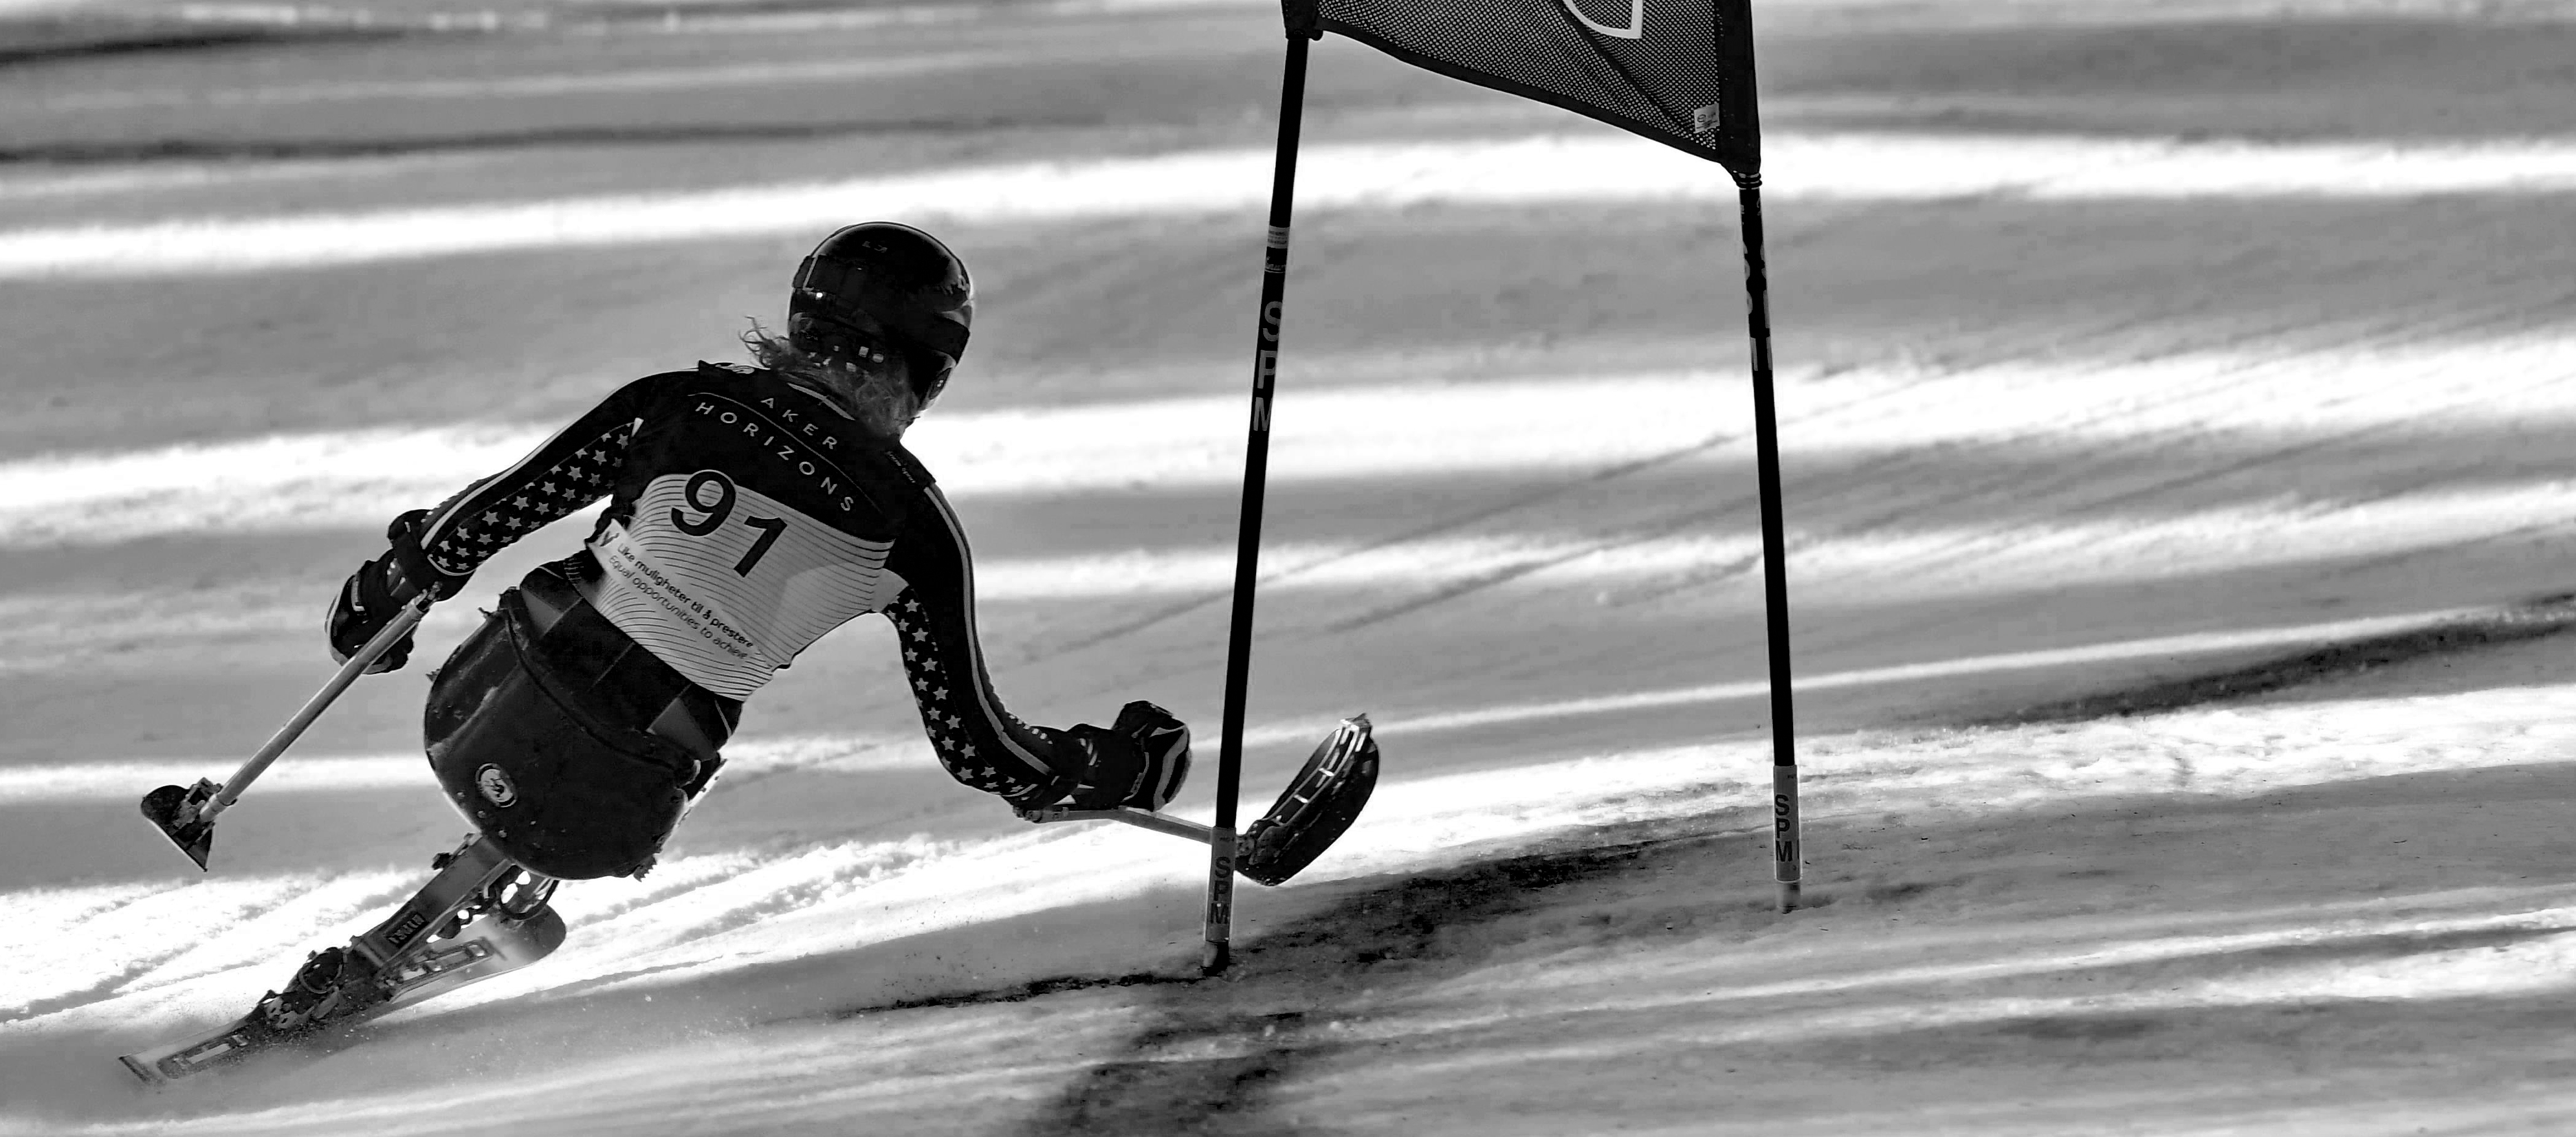 Ravi Drugan of USA competes in the Men's Sitting Downhill race at the World Para Snow Sports Championships at Hafjell on January 14, 2022 in Lillehammer, Norway. (Photo by Alex Livesey/Getty Images)